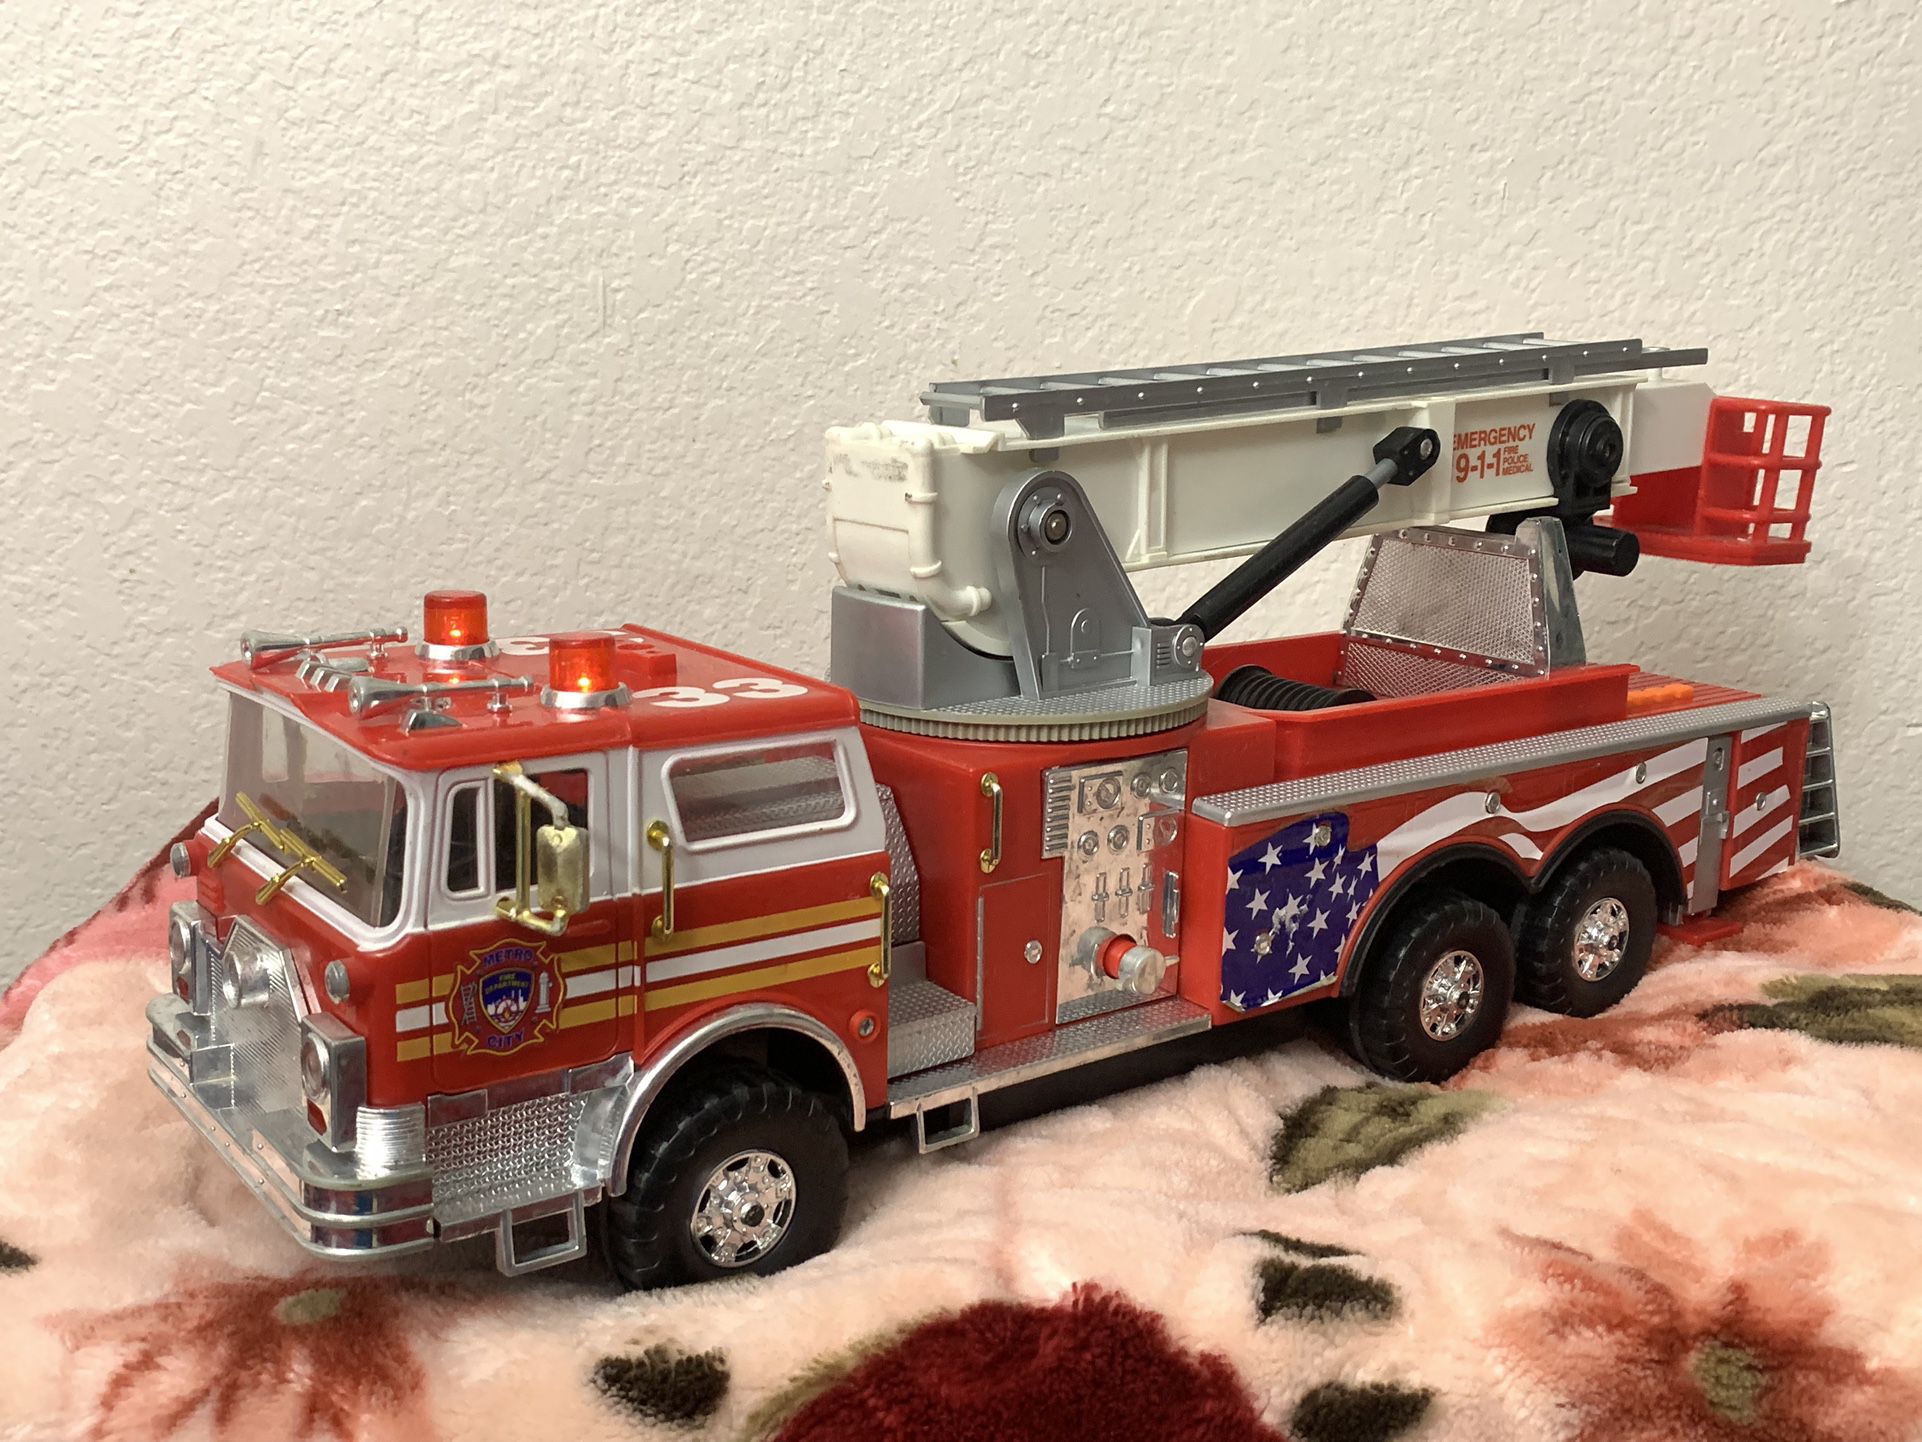 Toy Fire Truck Scientific Toys Play Vehicle 21” Long